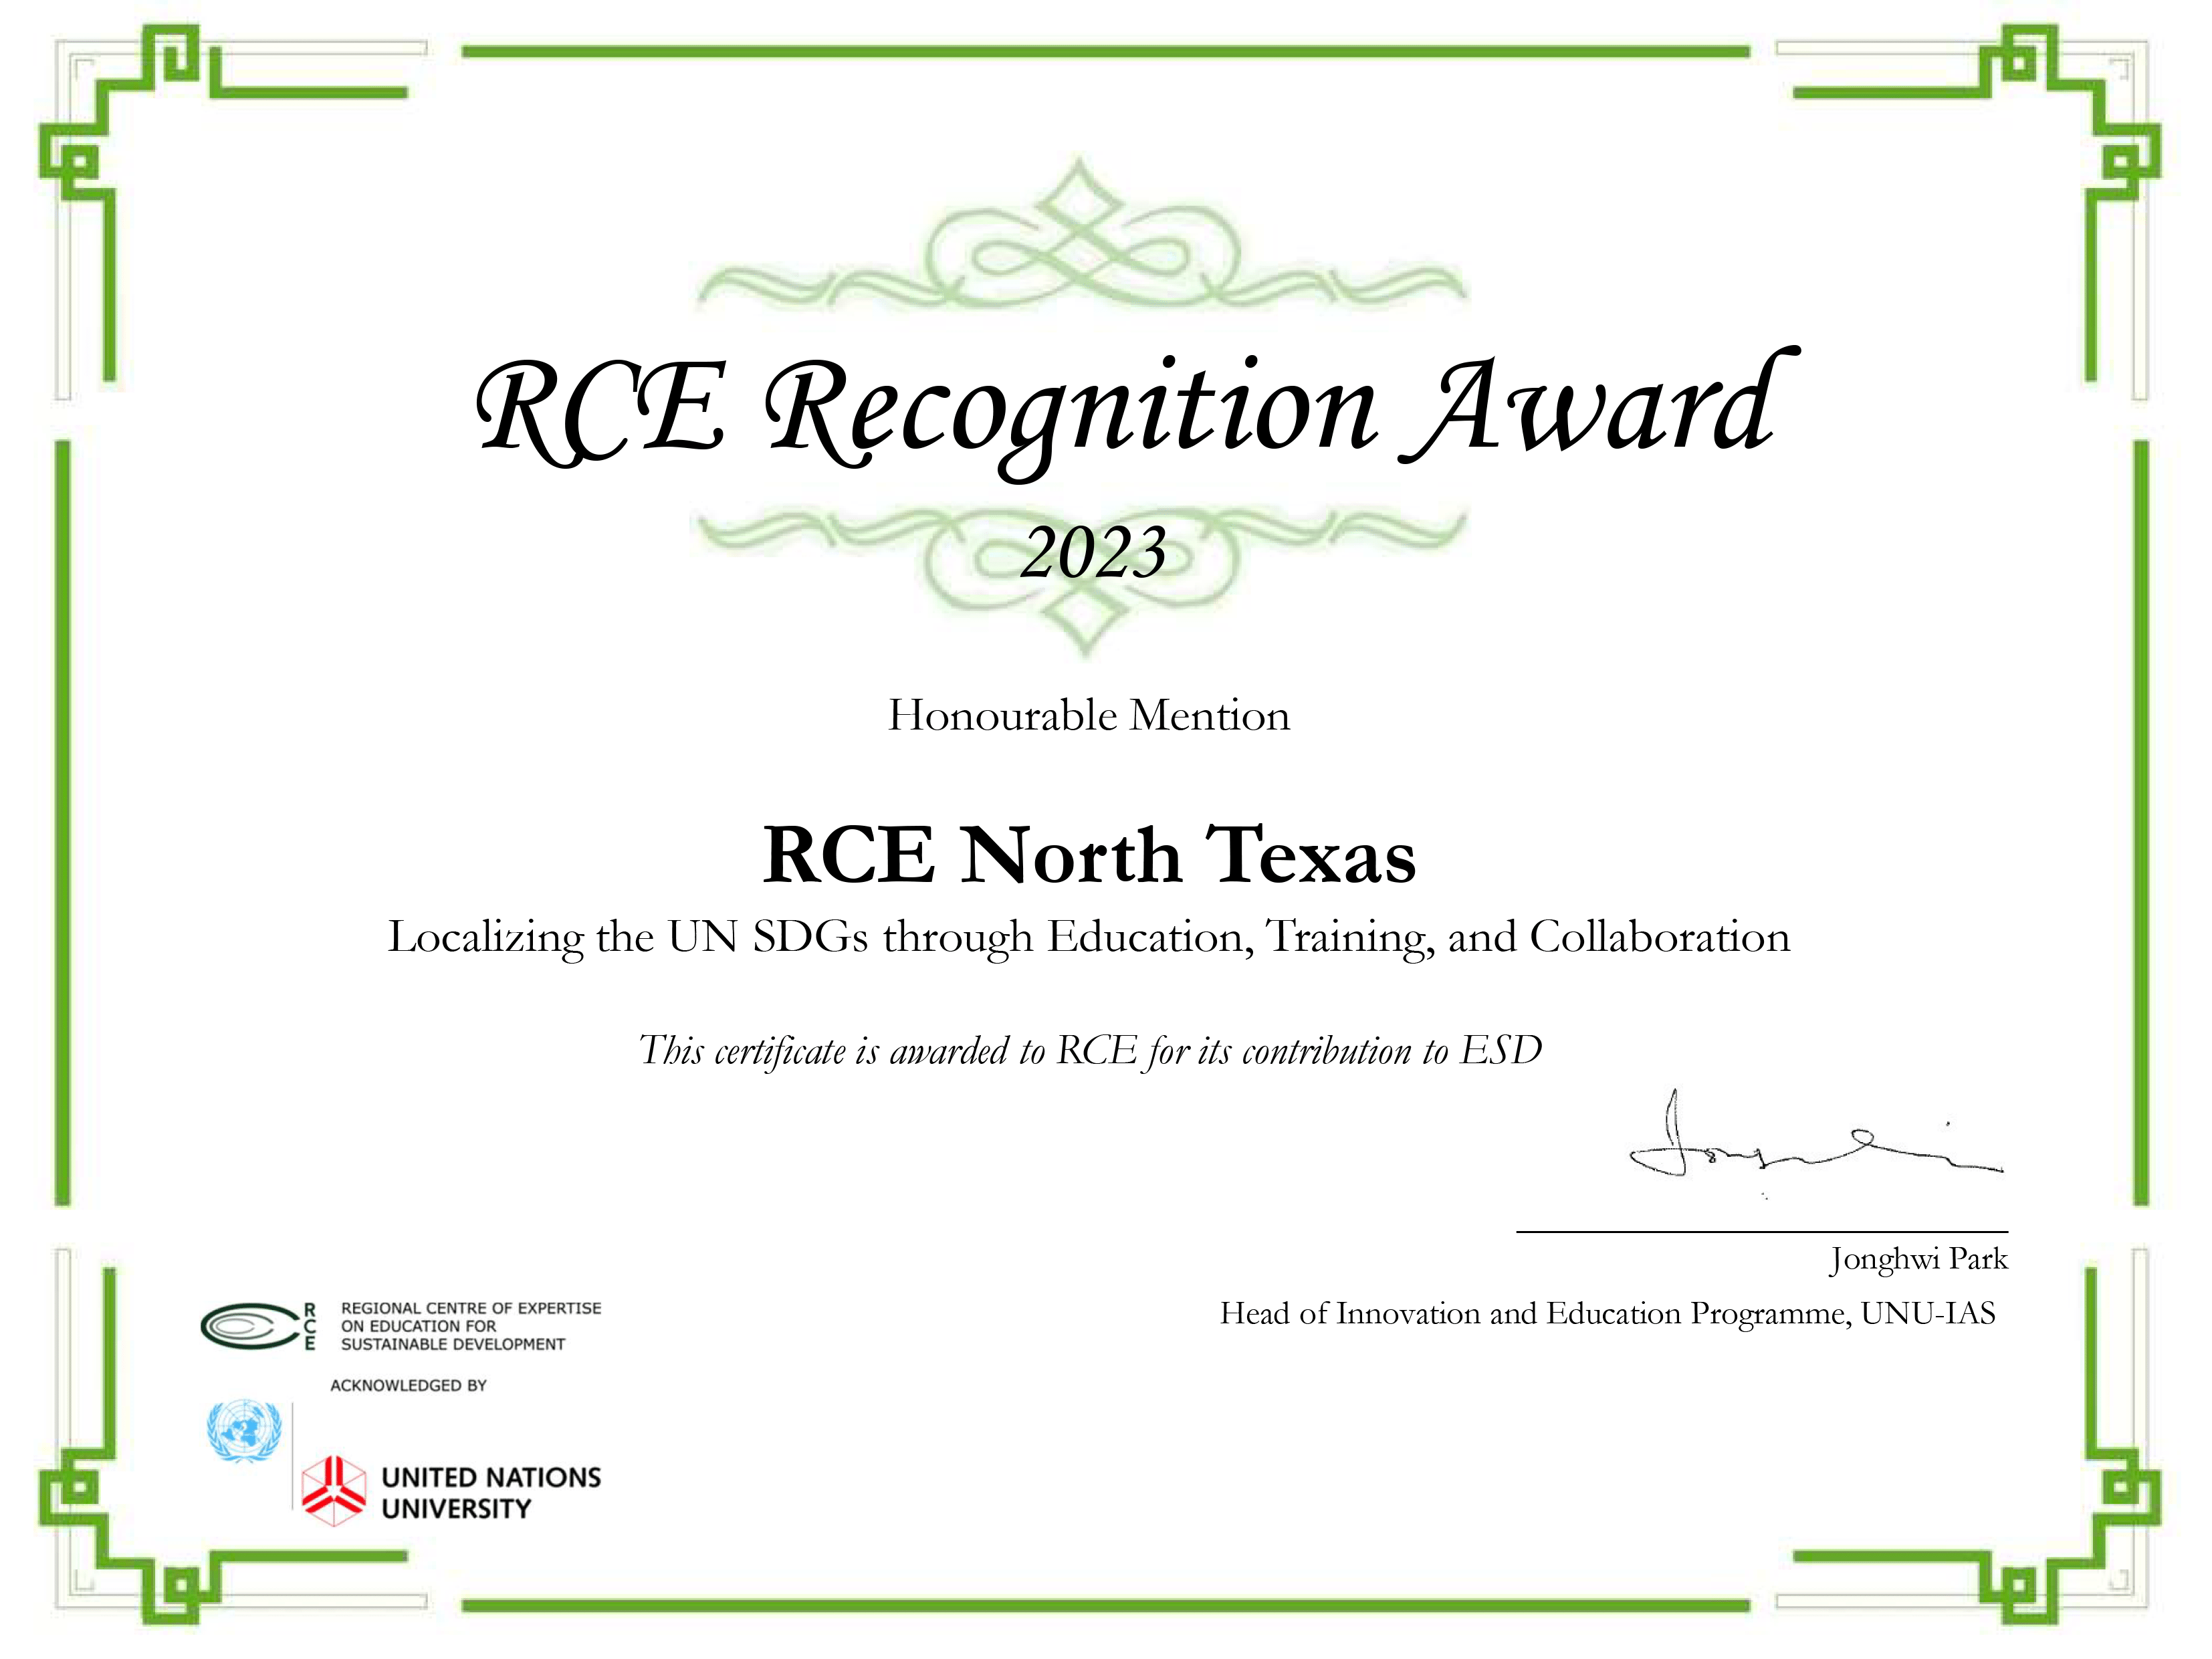 RCE Recognition Award for Implementing UN Sustainable Development Goals